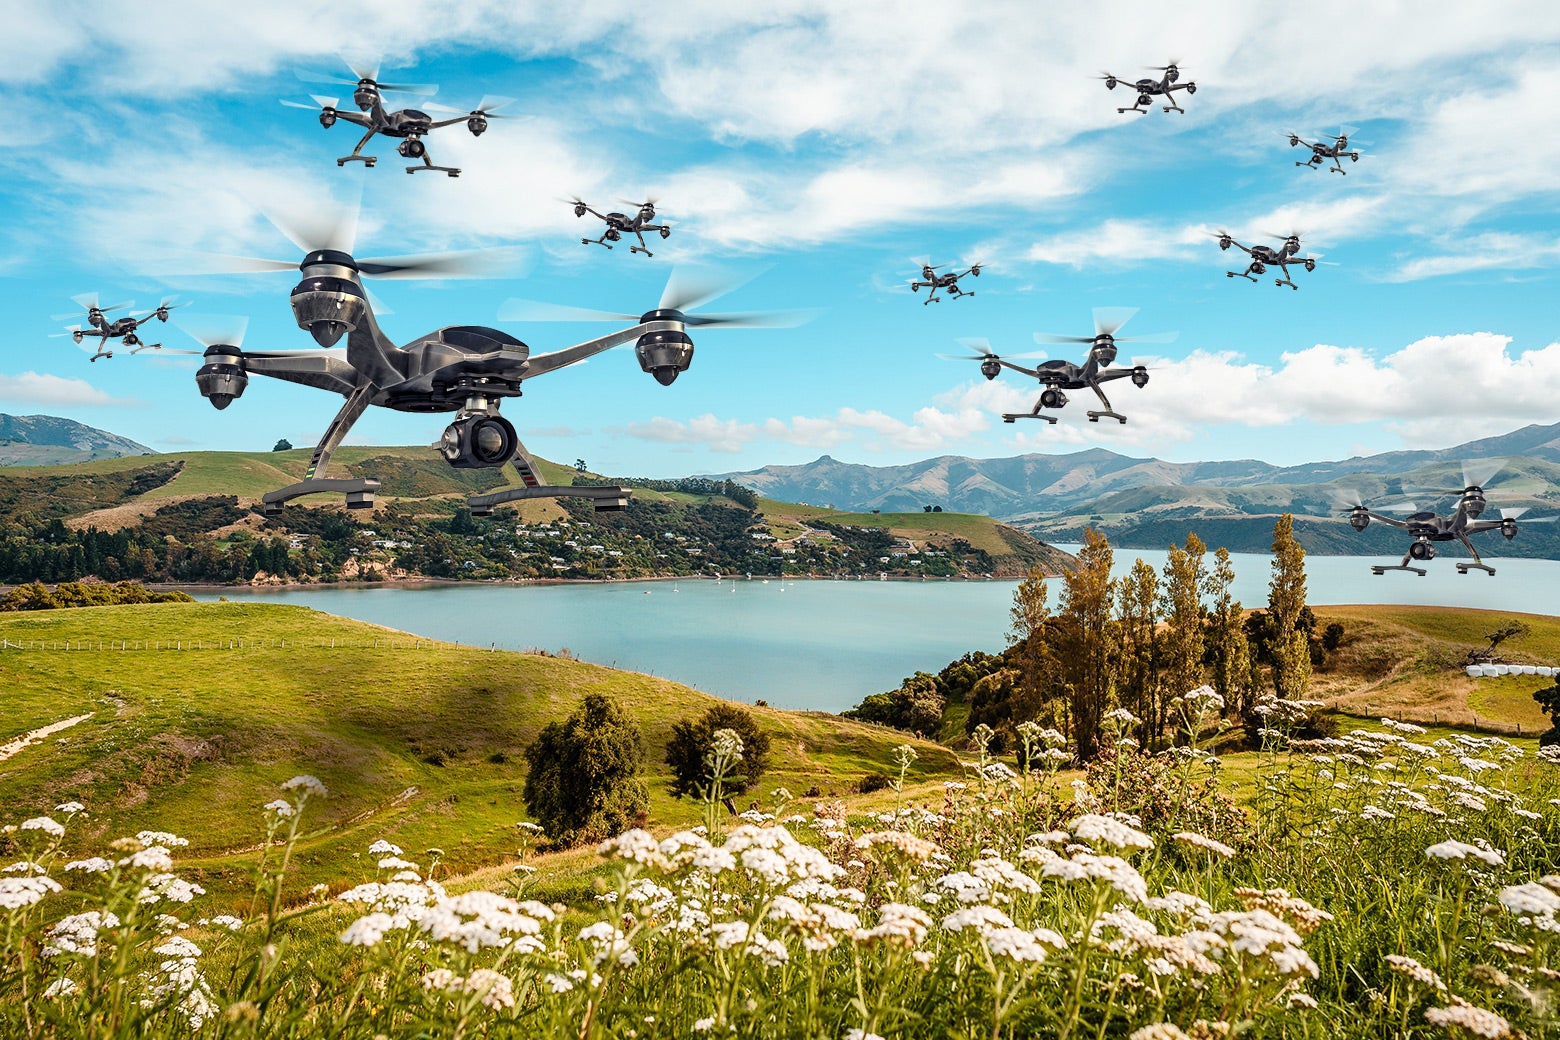 A beautiful New Zealand landscape, with drones hovering above it.